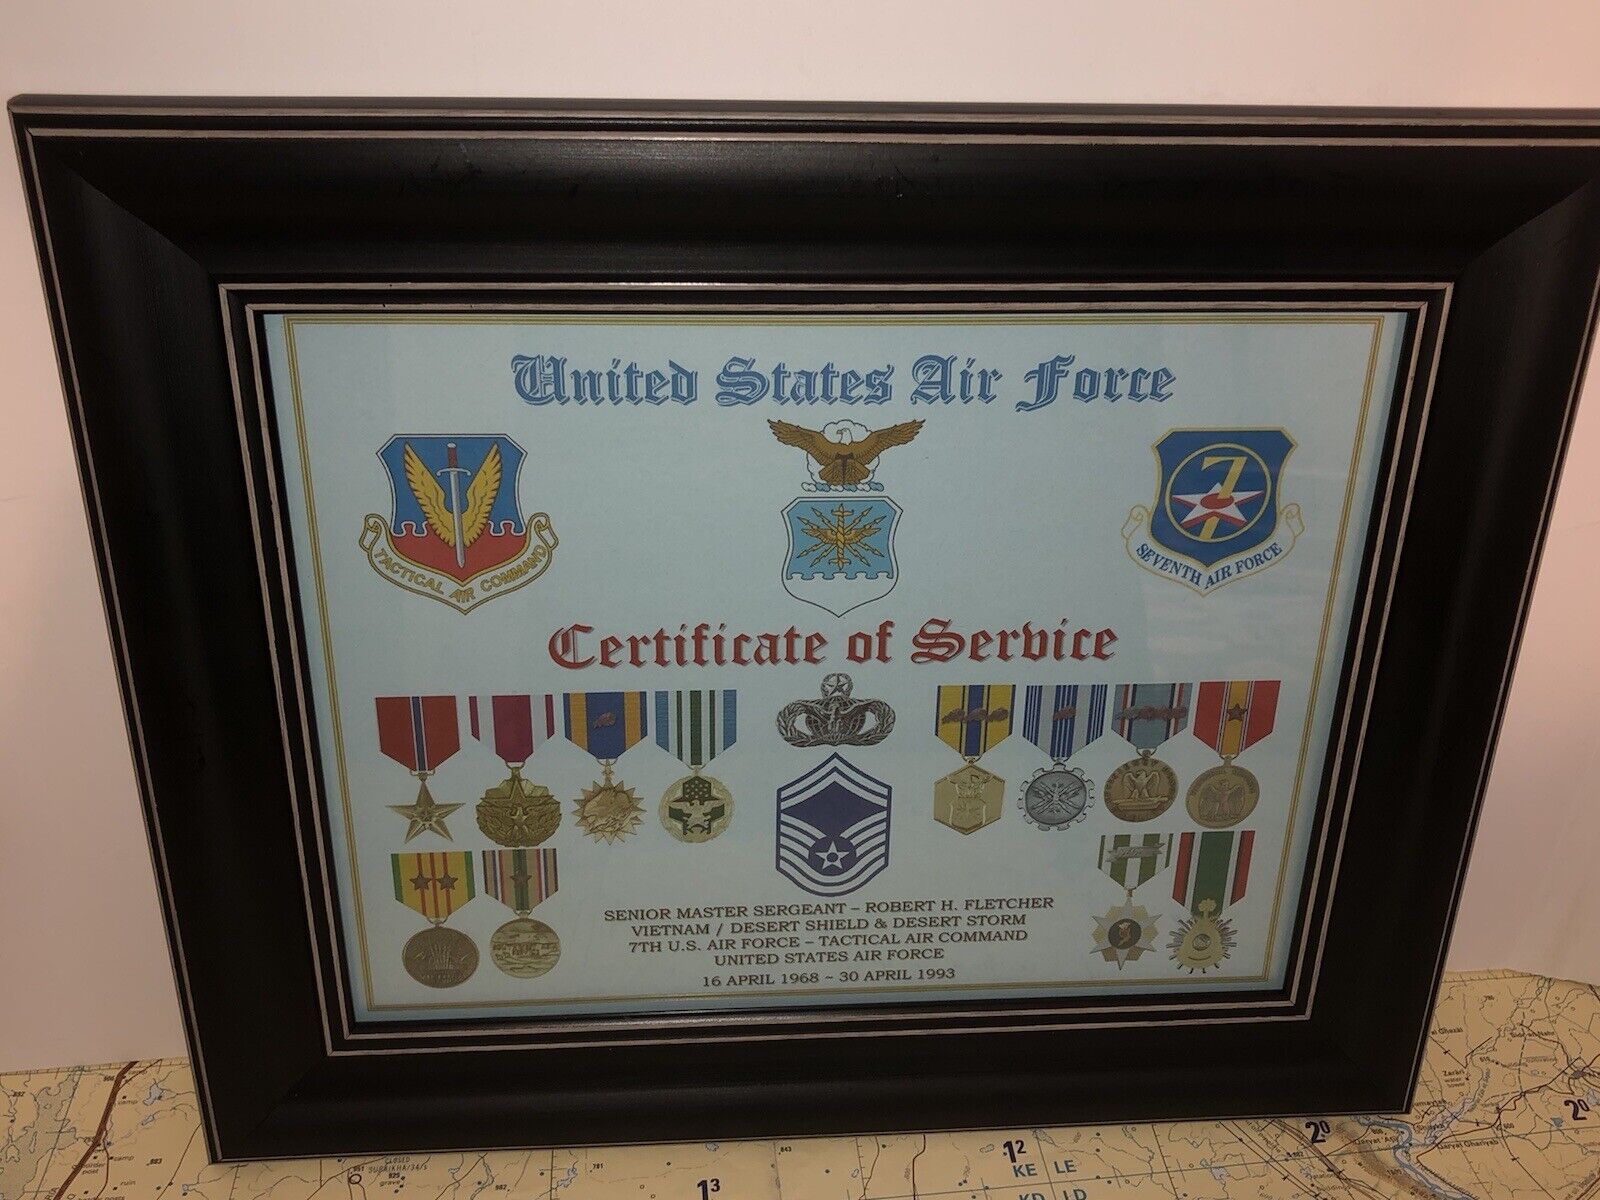 U.S. AIR FORCE CERTIFICATE OF SERVICE / SHADOW BOX PRINT / W-MEDALS 